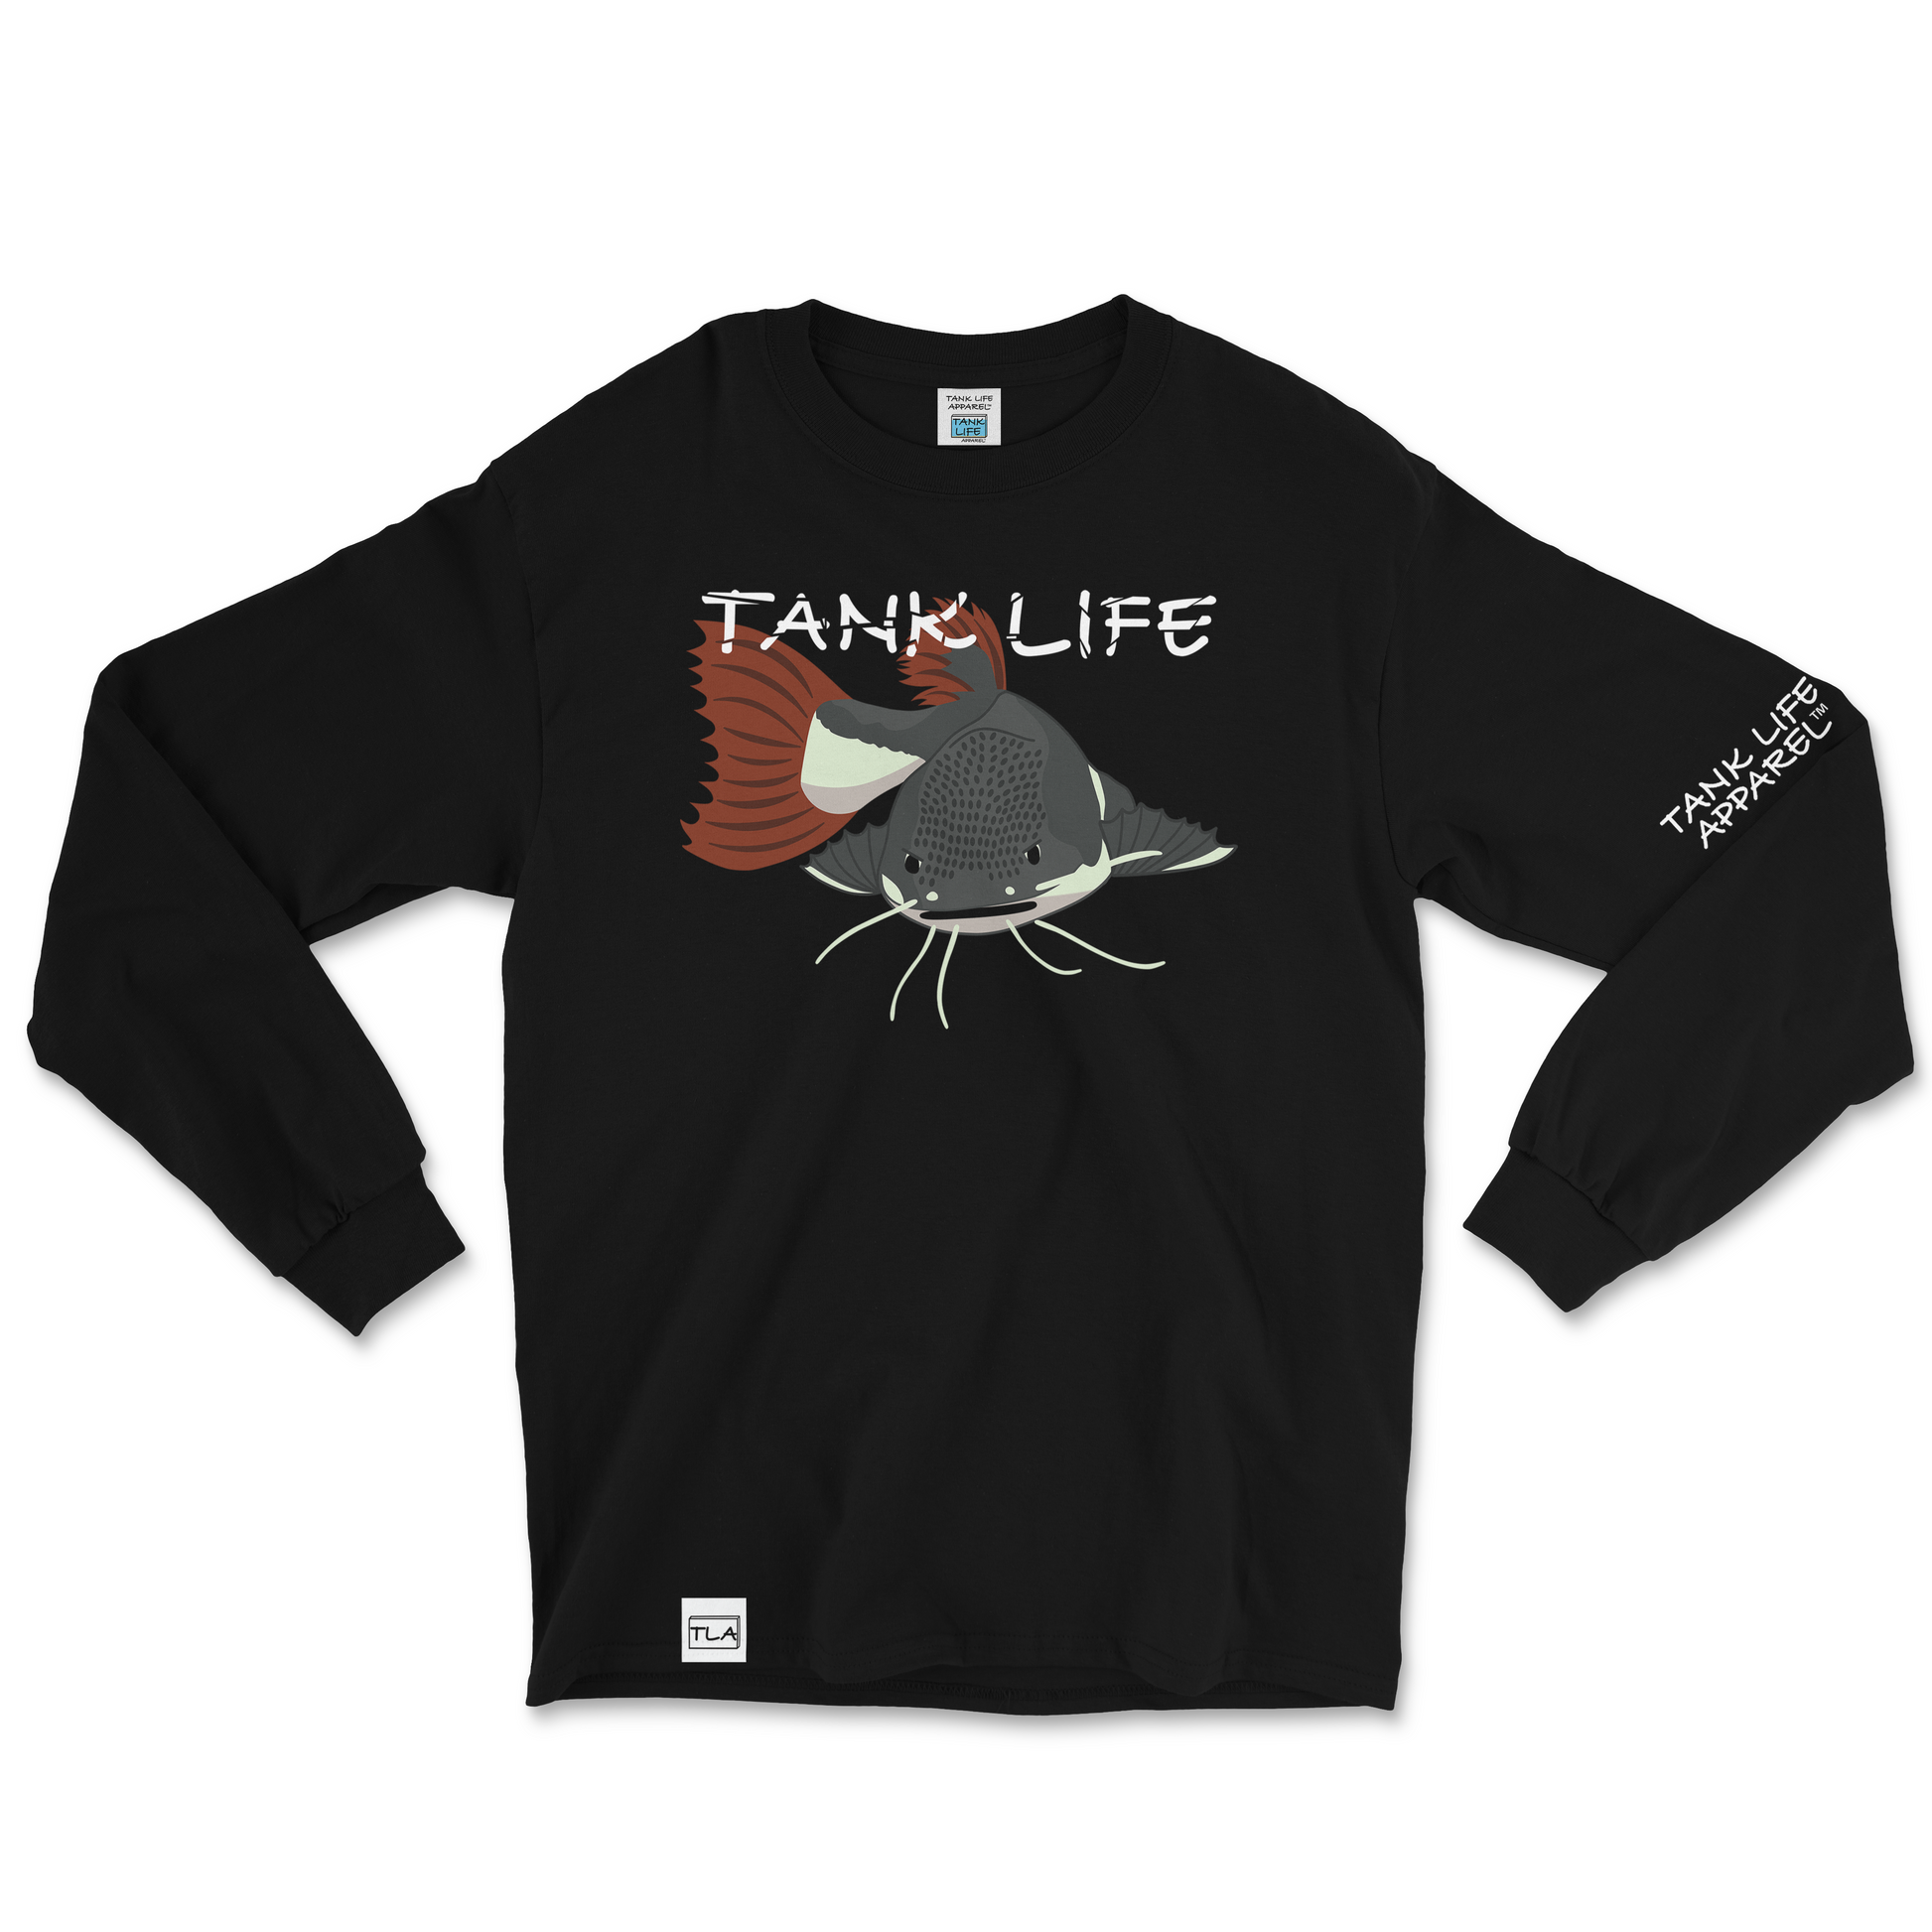 The Tank Life Apparel red tail catfish design on a super comfortable long sleeve shirt. Gray catfish with white belly and whiskers and red tail.